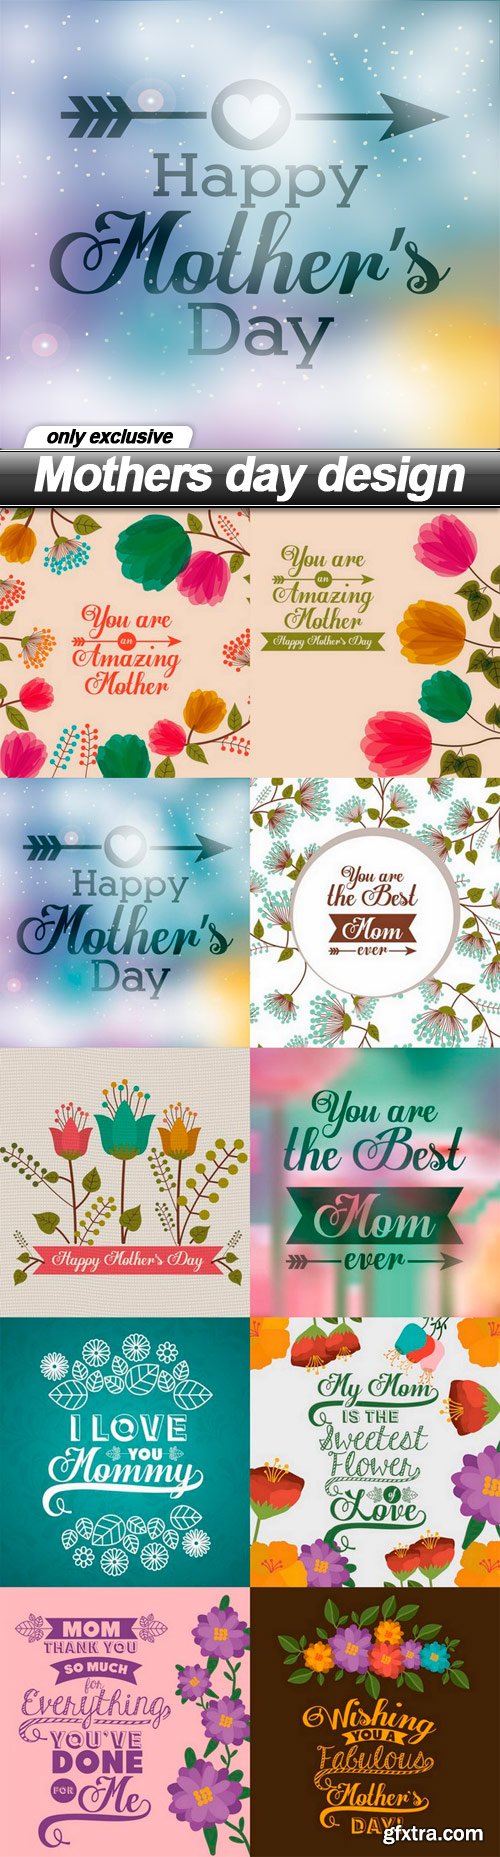 Mothers day design - 10 EPS